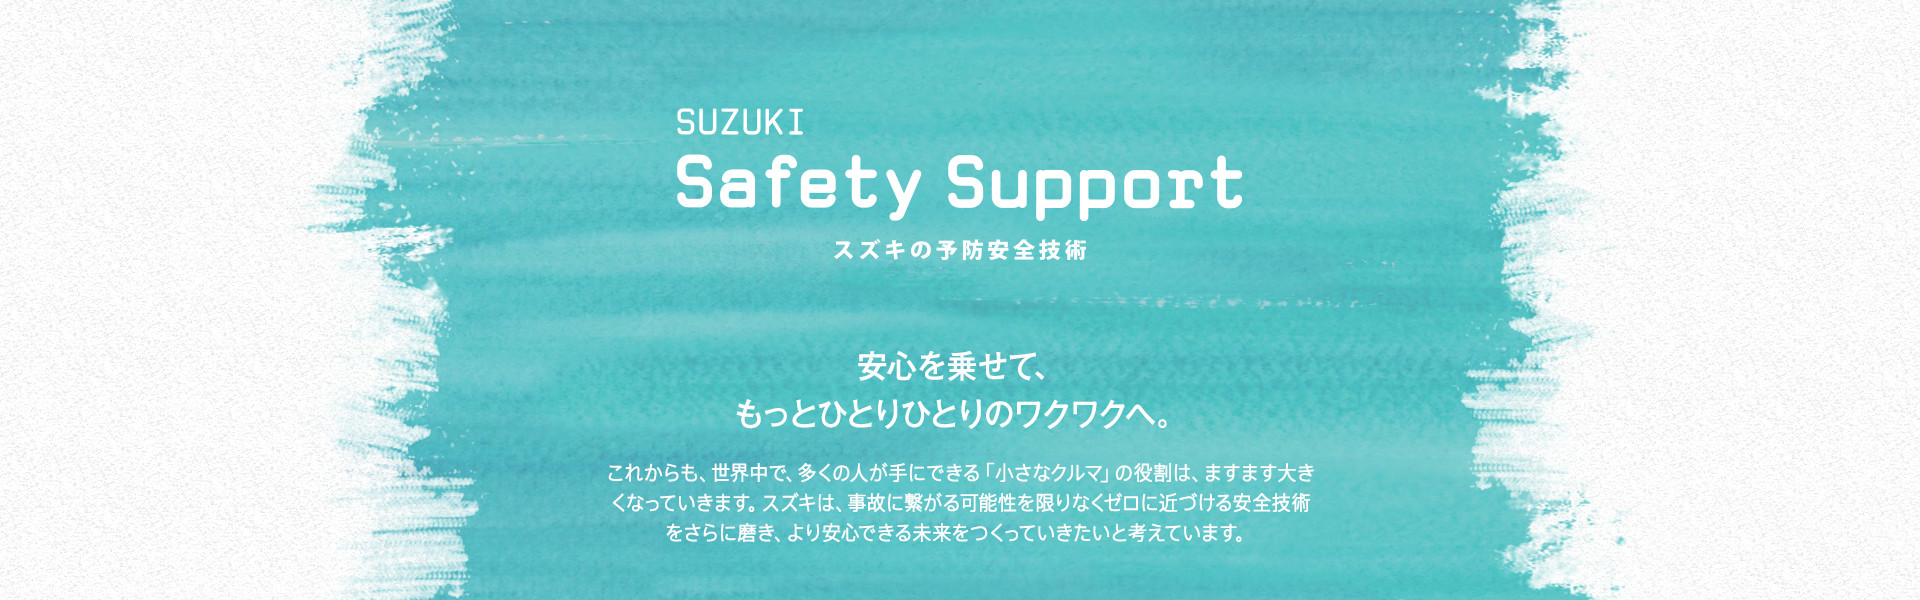 Safety Support